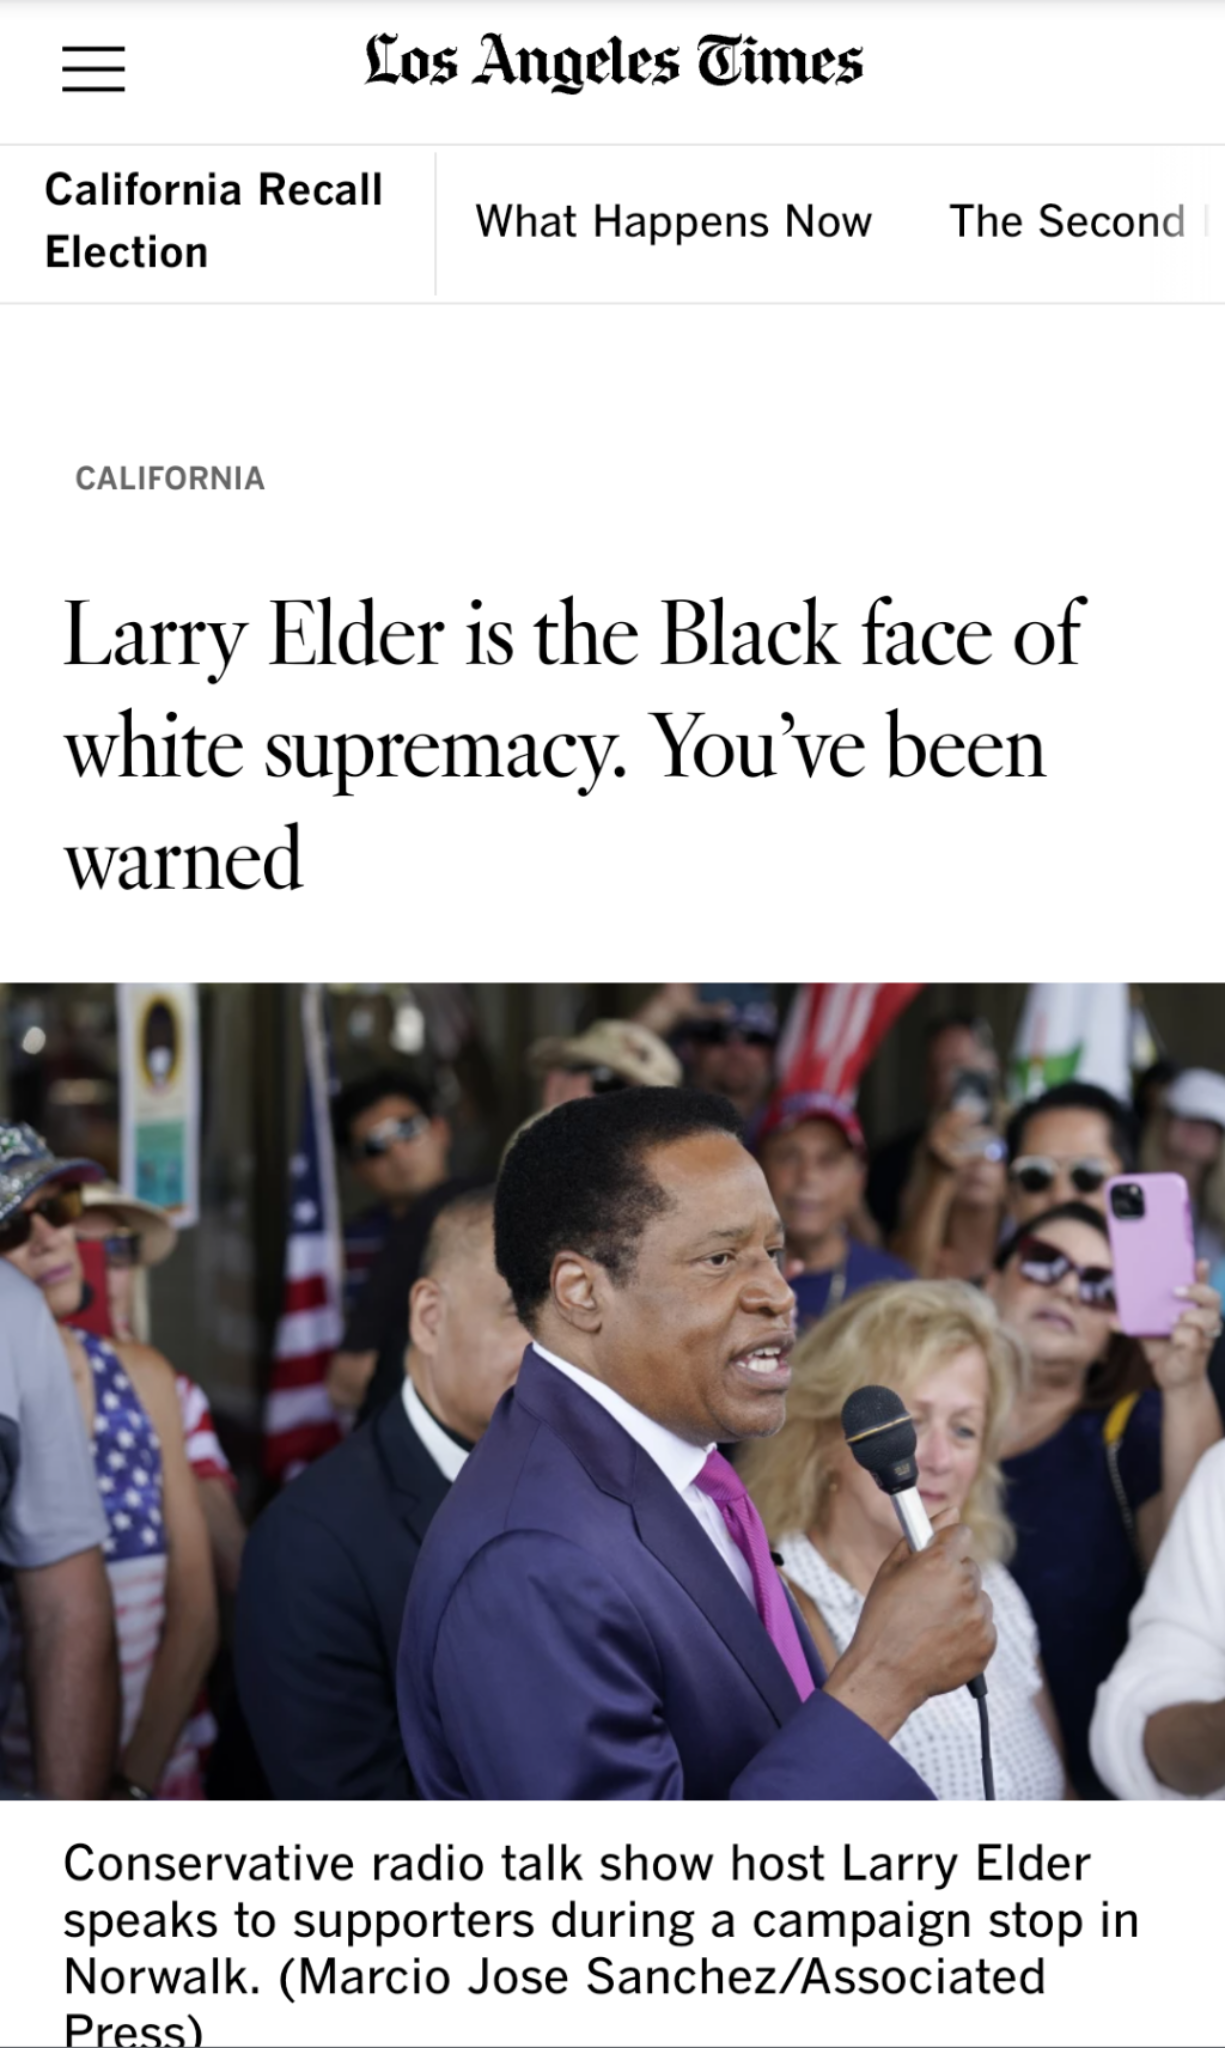 Los Angeles Times attacks Larry Elder with racist colum